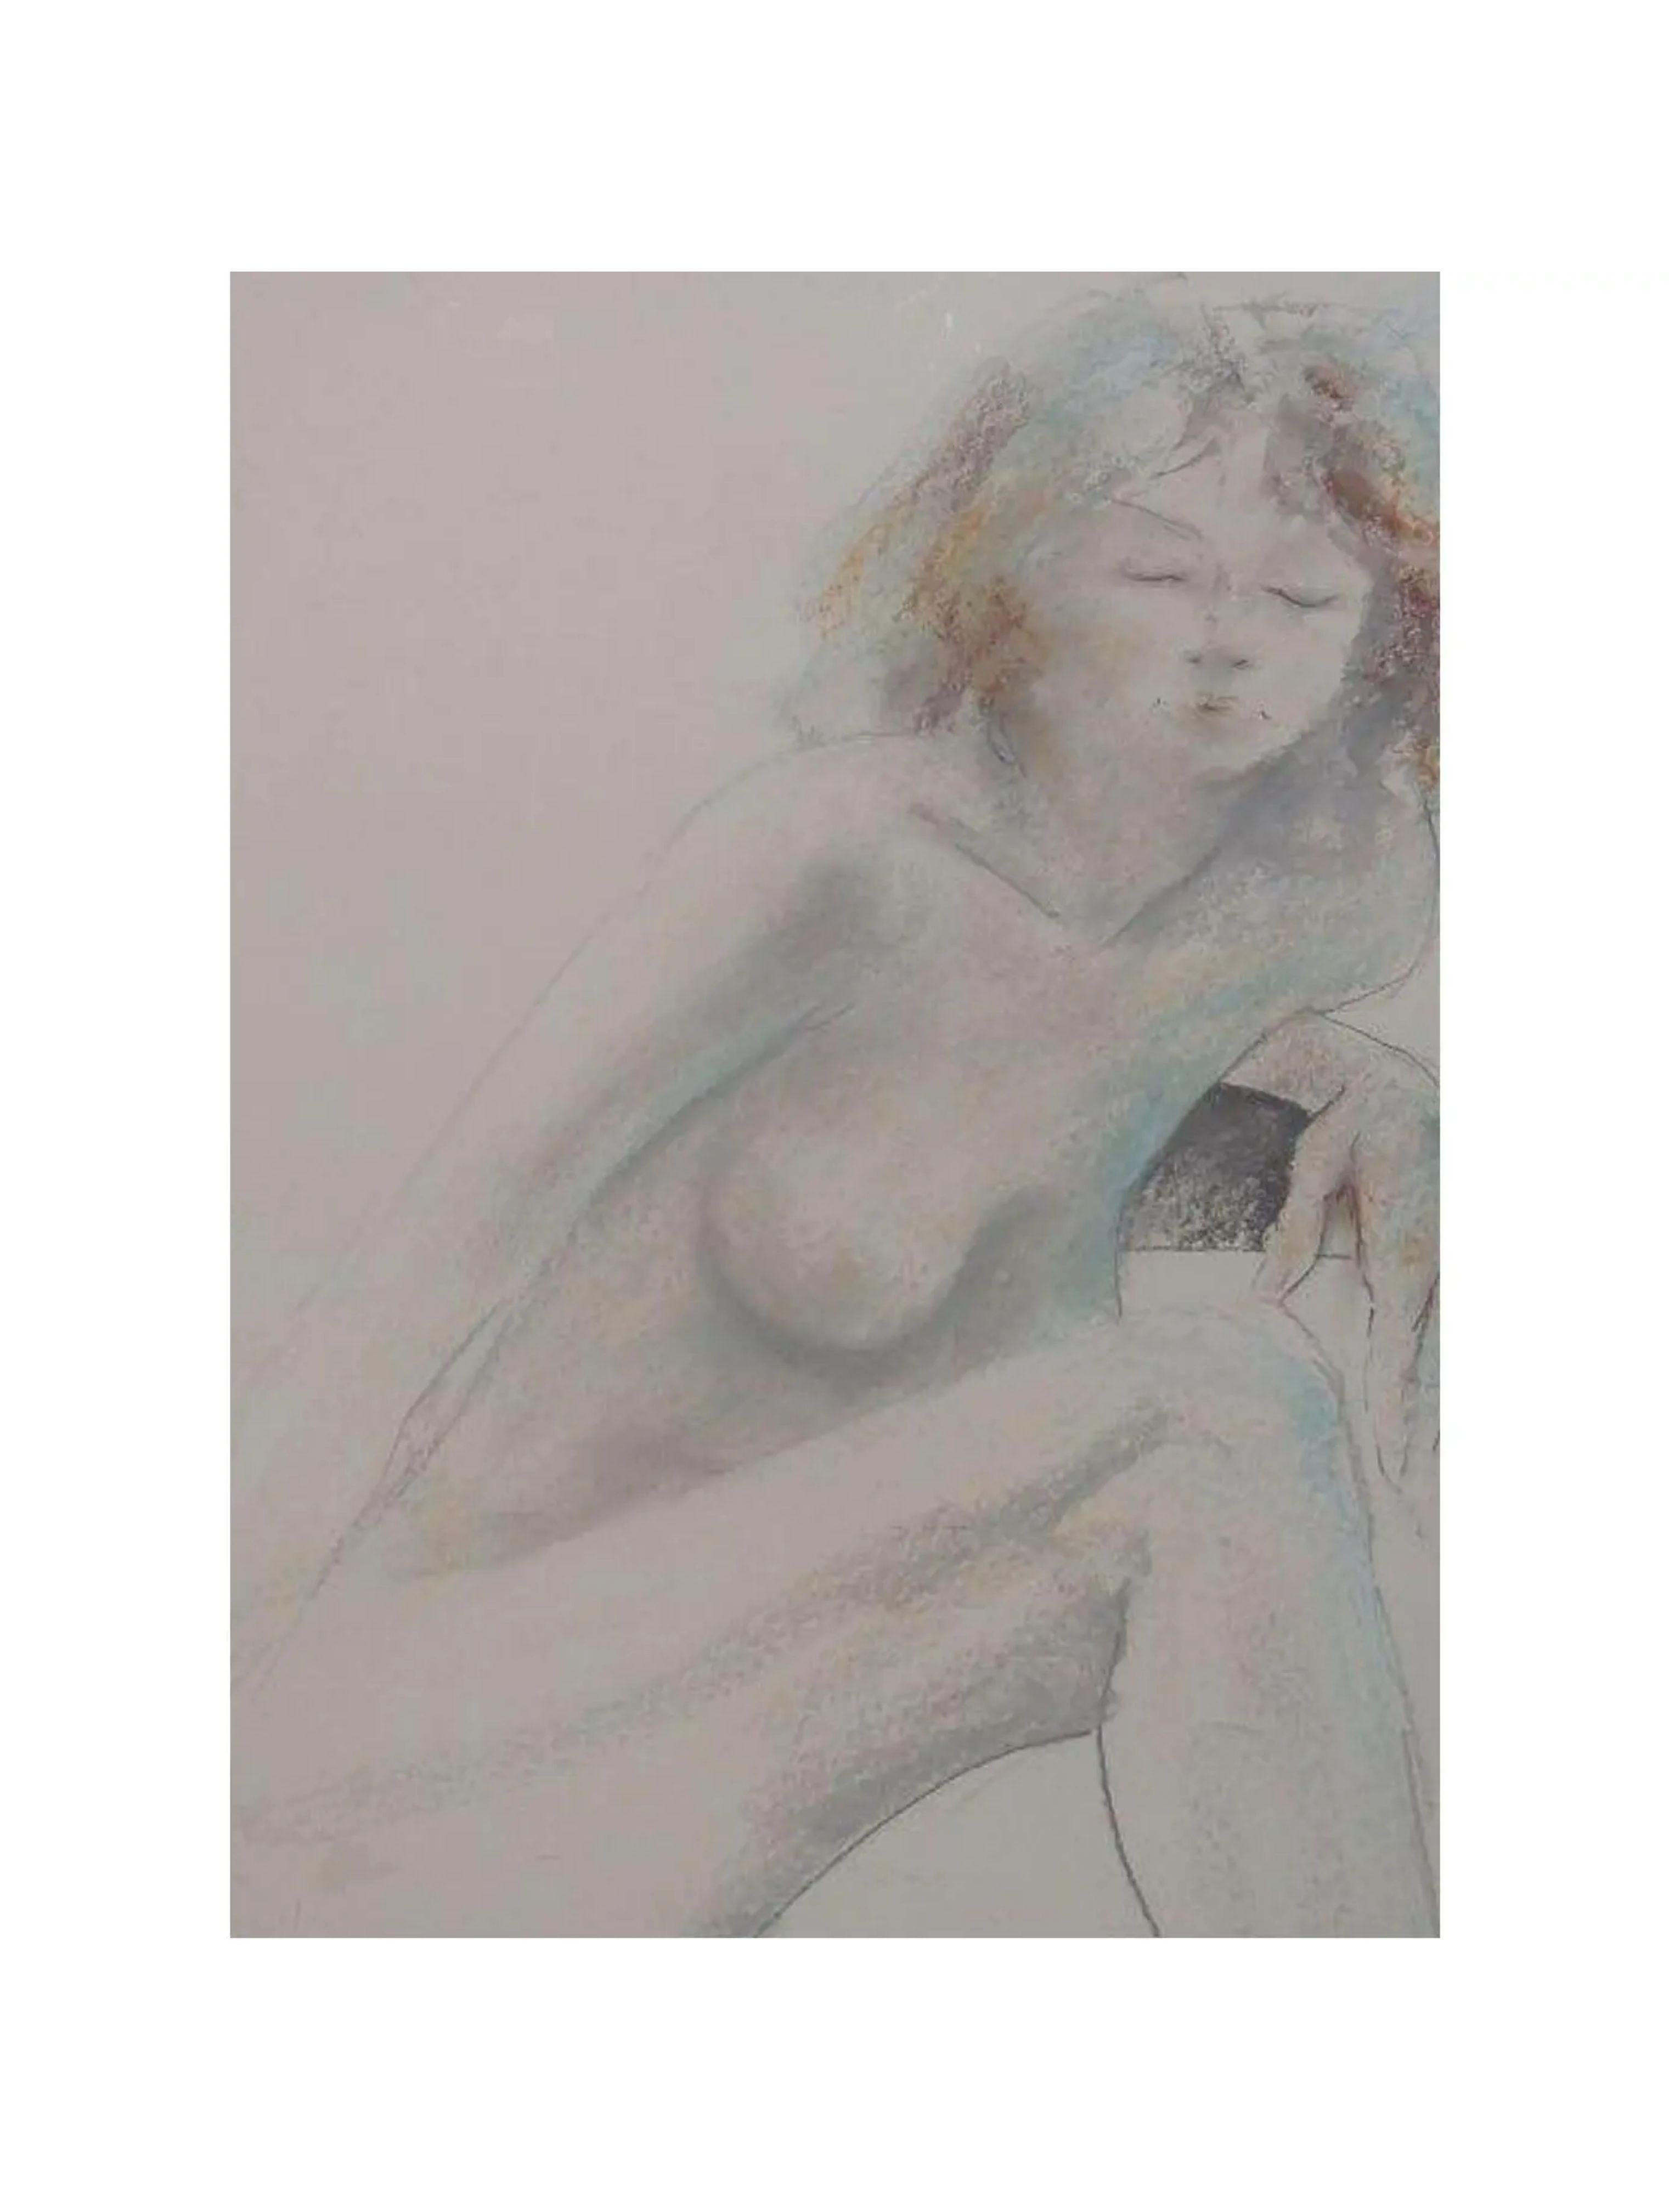 Original Dario Campanile female nude drawing, circa 1995. It is beautifully framed and matted.
Additional information:
Materials: Paper.
Color: Gray.
Period: 1990s.
Art subjects: Nude.
Styles: Modern.
Frame type: Framed.
Item Type: Vintage,